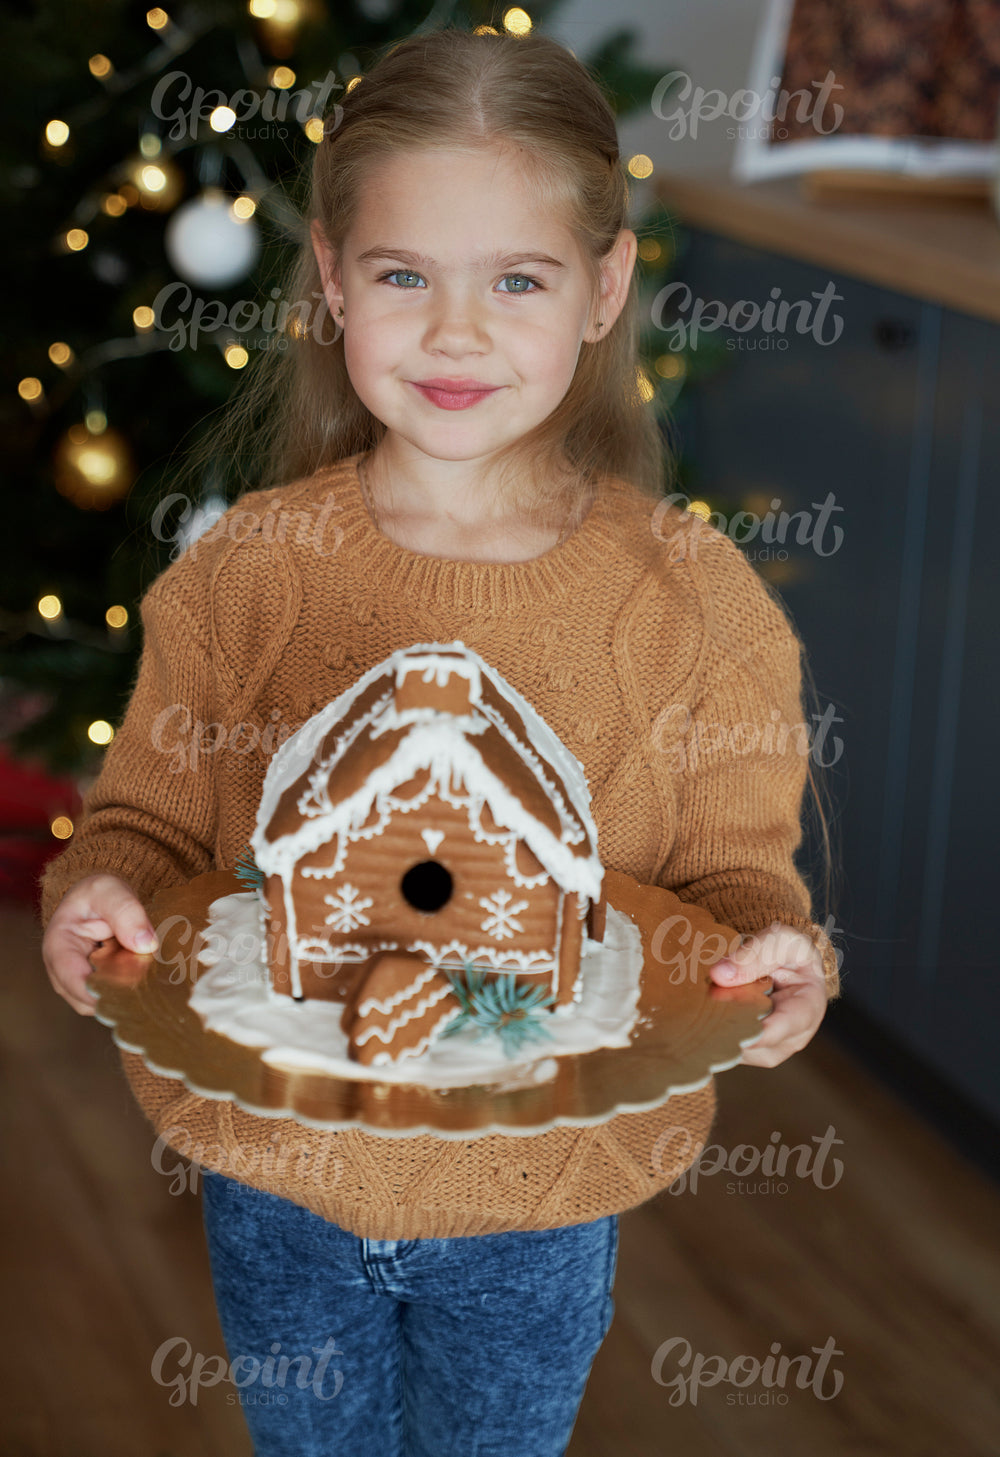 Little girl holding decorated gingerbread house